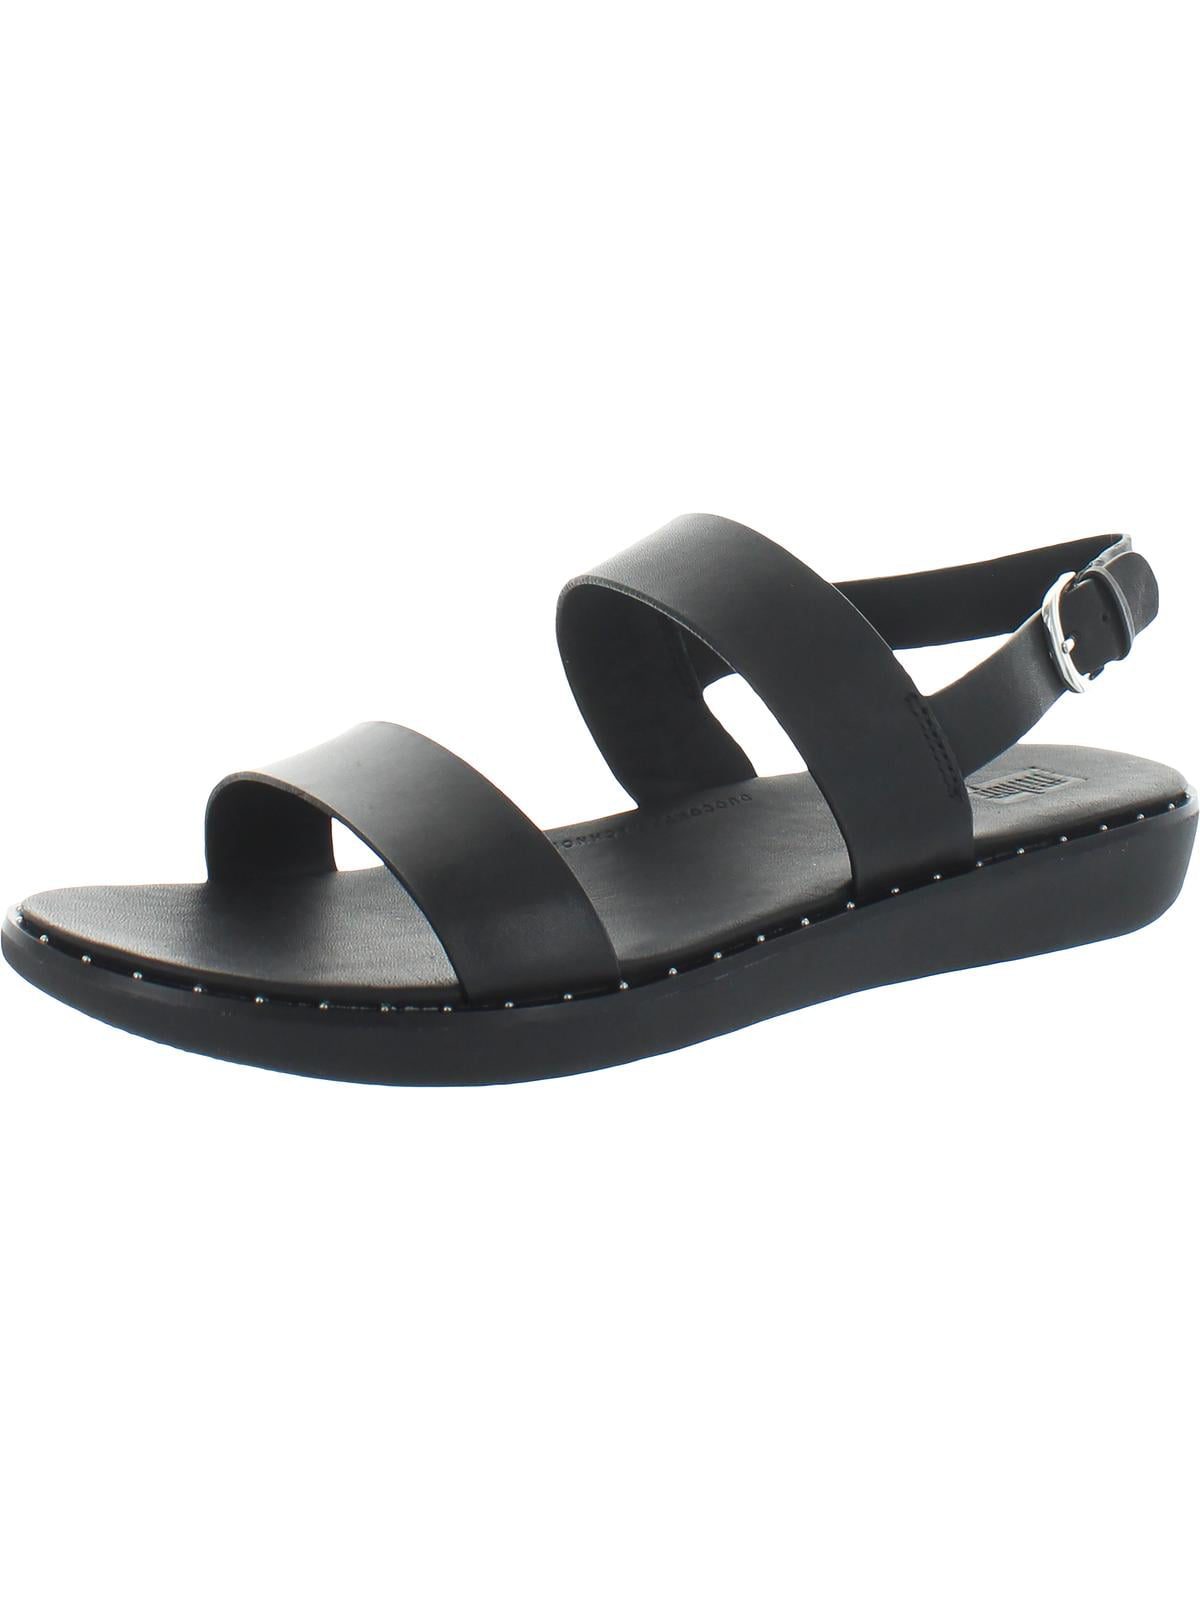 Fitflop Womens Barra Leather Studded Slingback Sandals